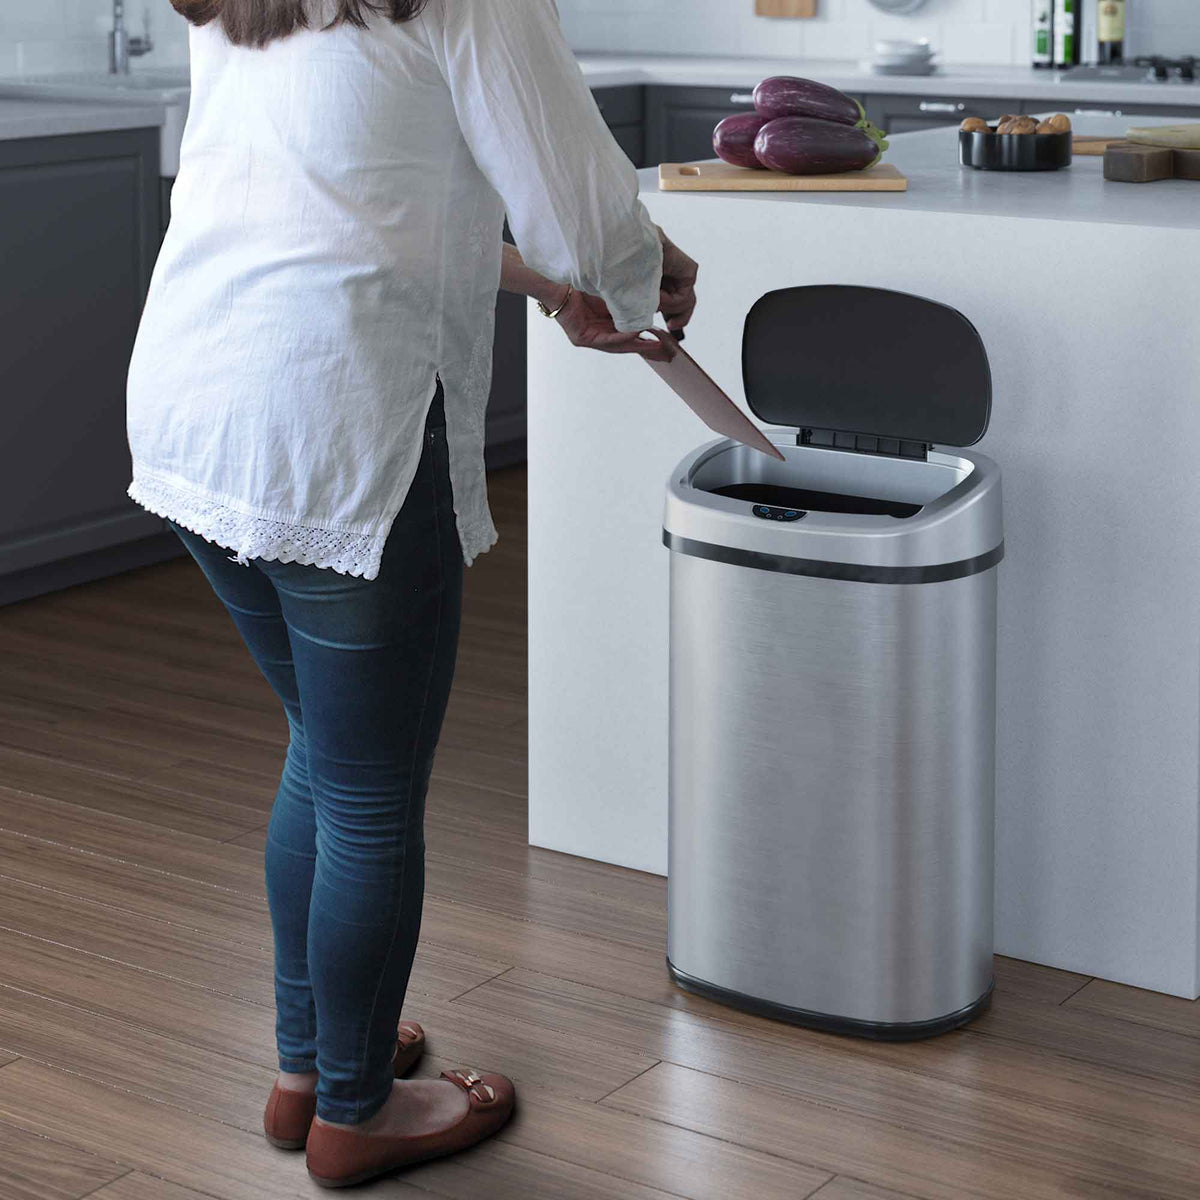 iTouchless 13 Gallon Oval Sensor Trash Can with Odor Filter in kitchen